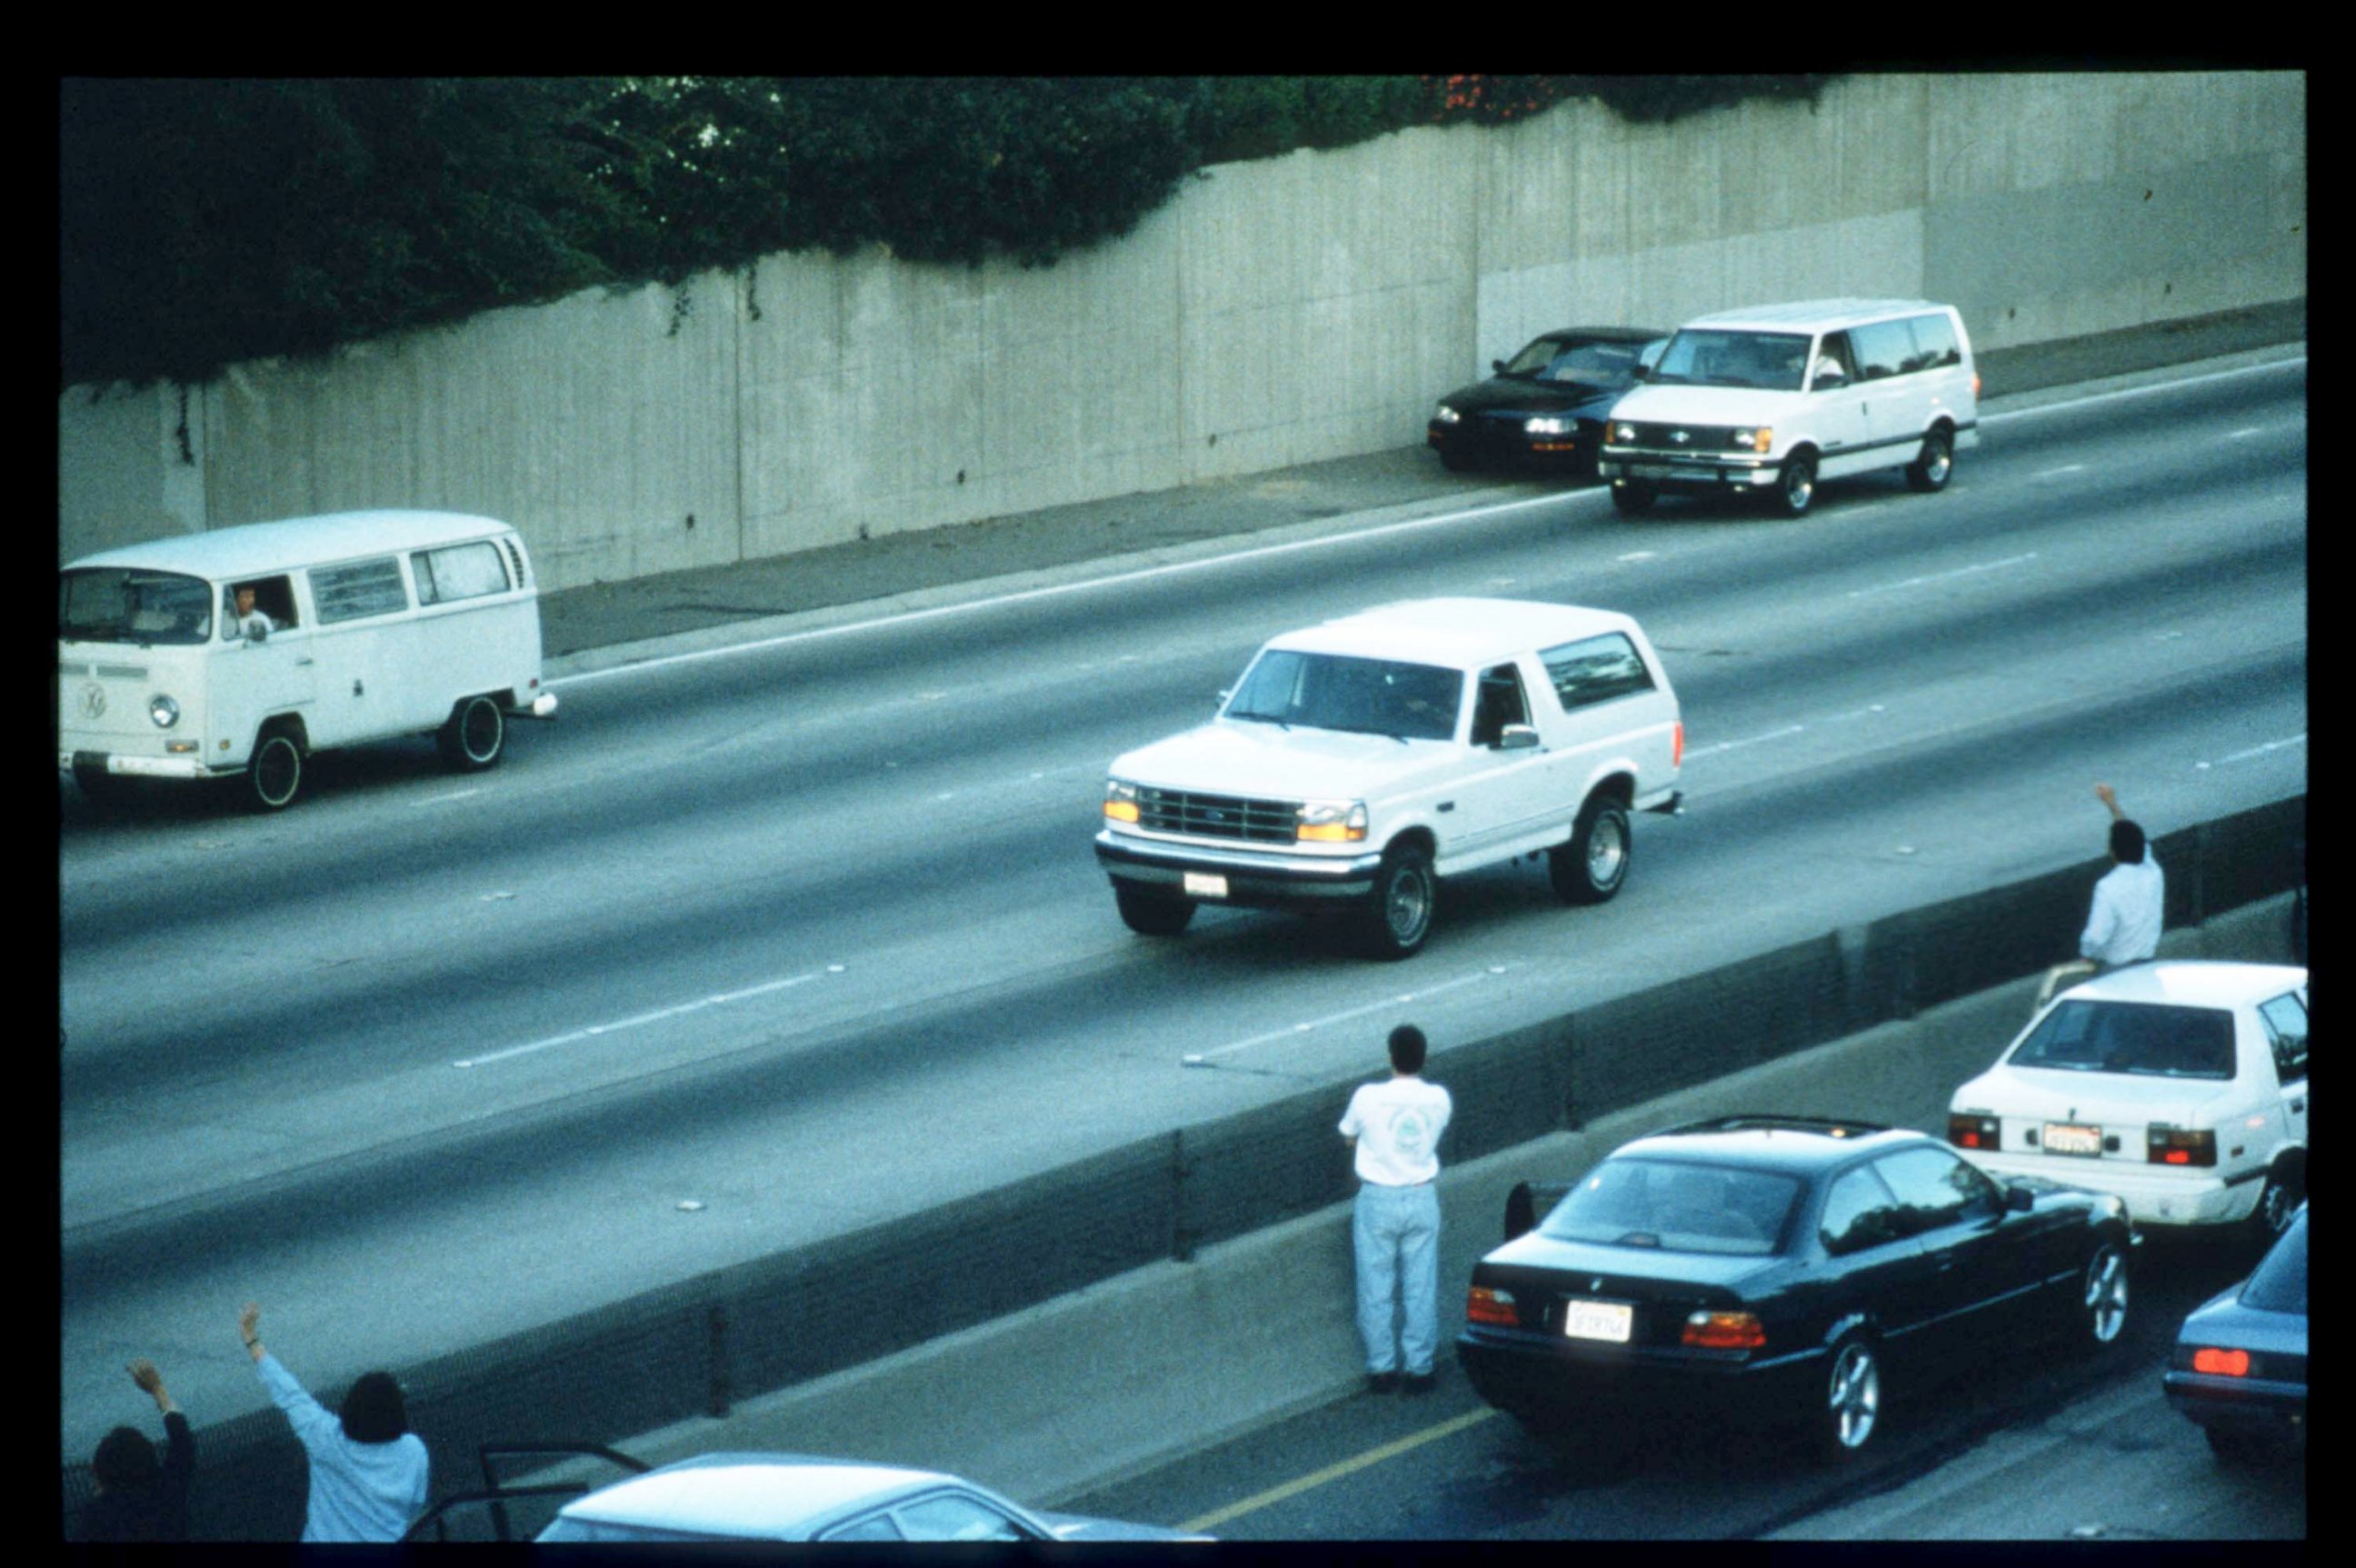 PHOTO: Motorists wave as police cars pursue the white Ford Bronco, center, driven by Al Cowlings, carrying fugitive murder suspect O.J. Simpson, June 17, 1994, on the 405 freeway in Los Angeles.